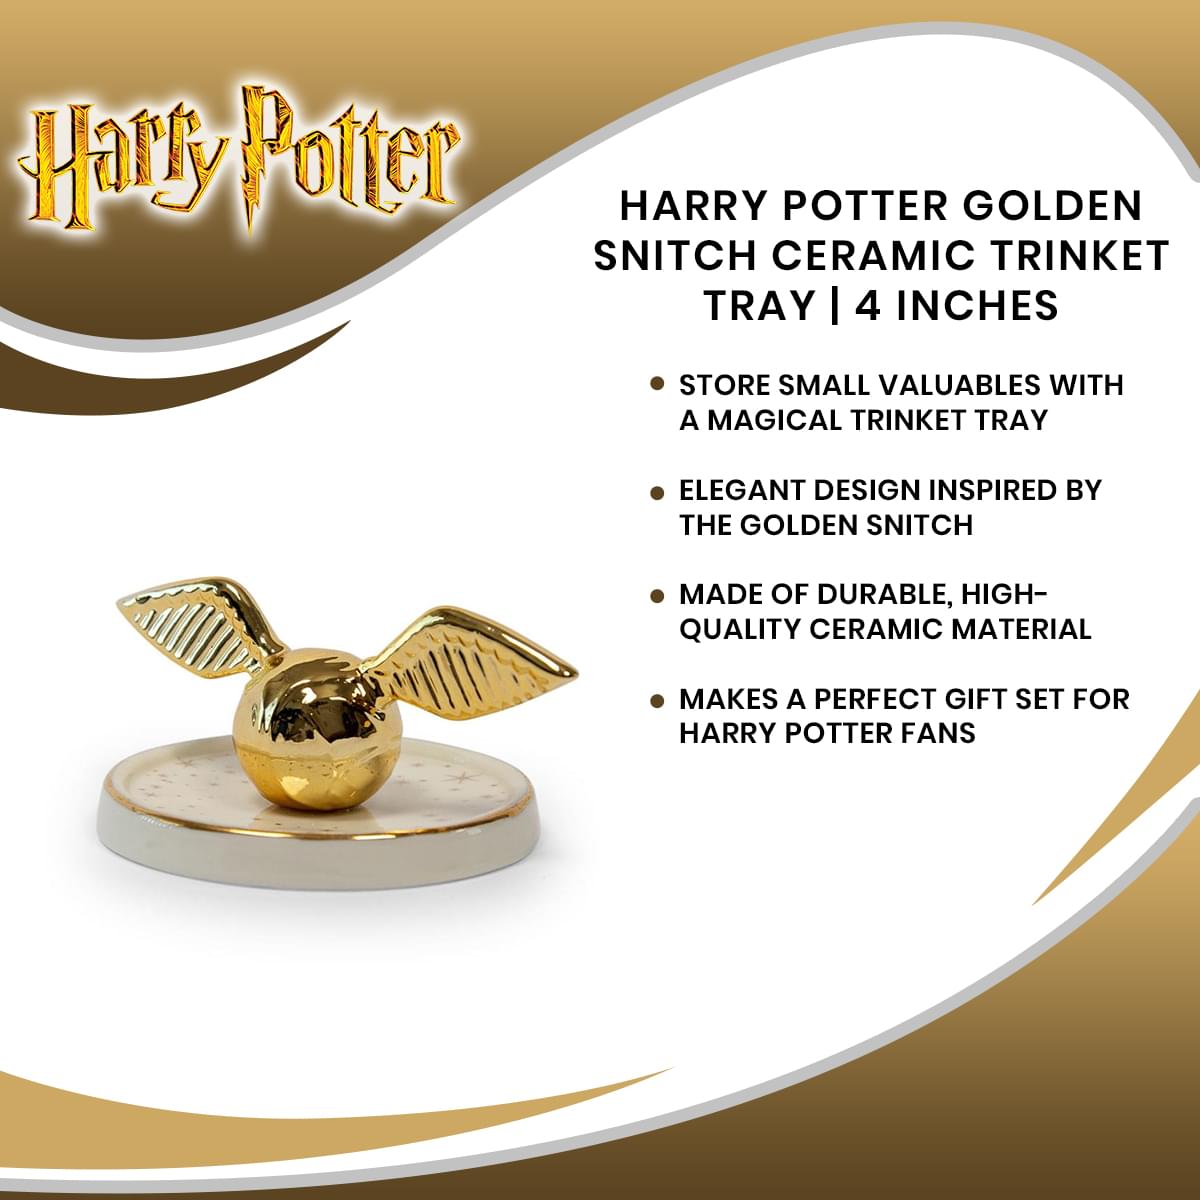 Harry Potter Golden Snitch Ceramic Trinket Tray | 4 Inches